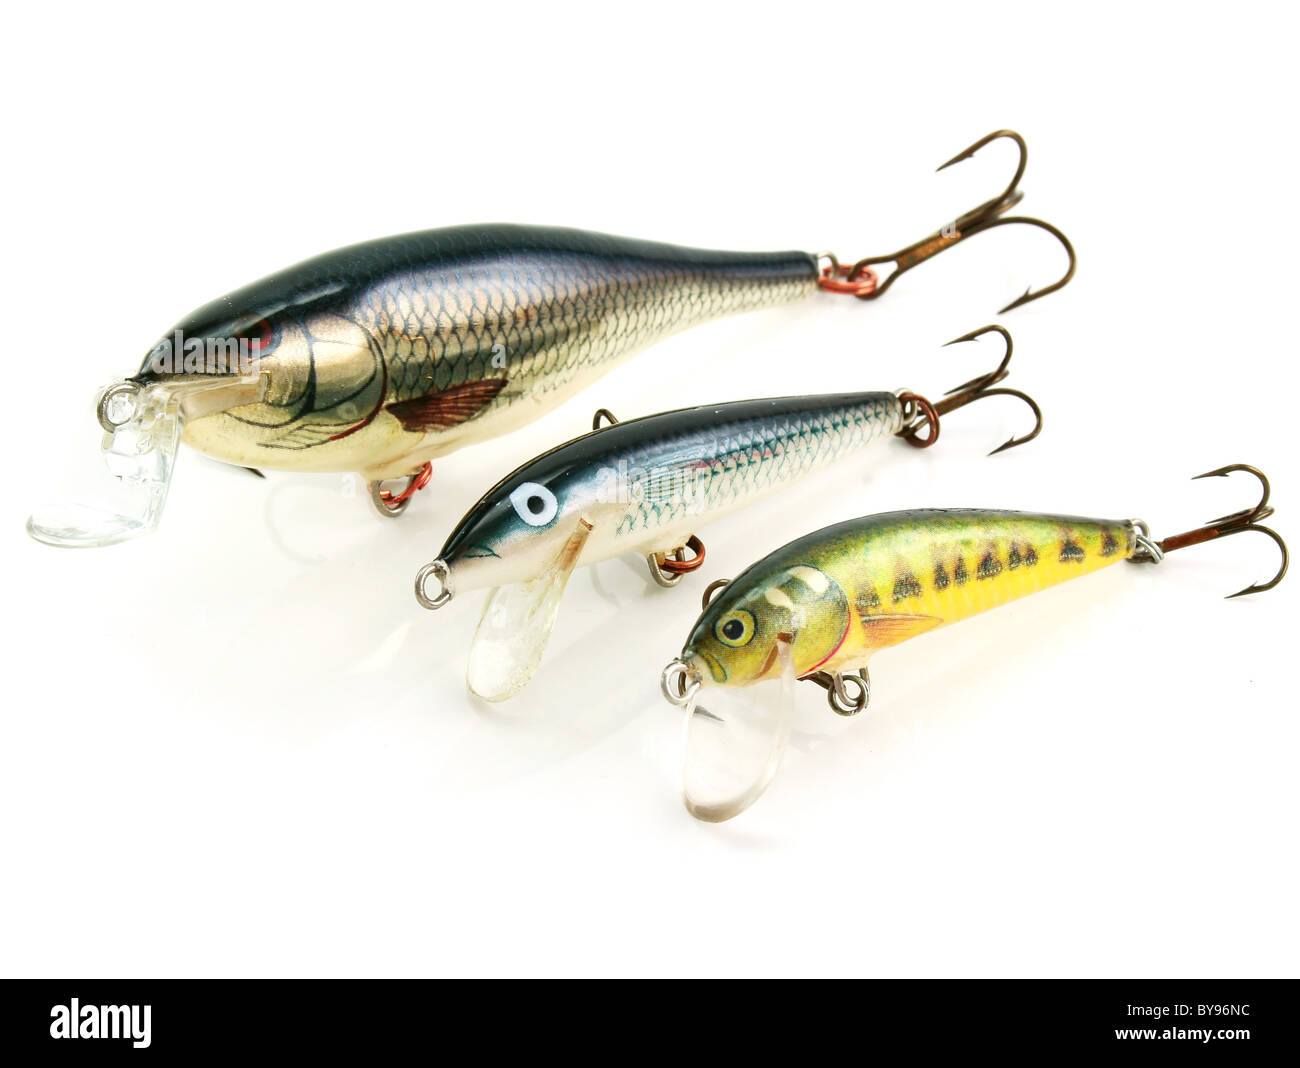 Fish biting lure Cut Out Stock Images & Pictures - Alamy